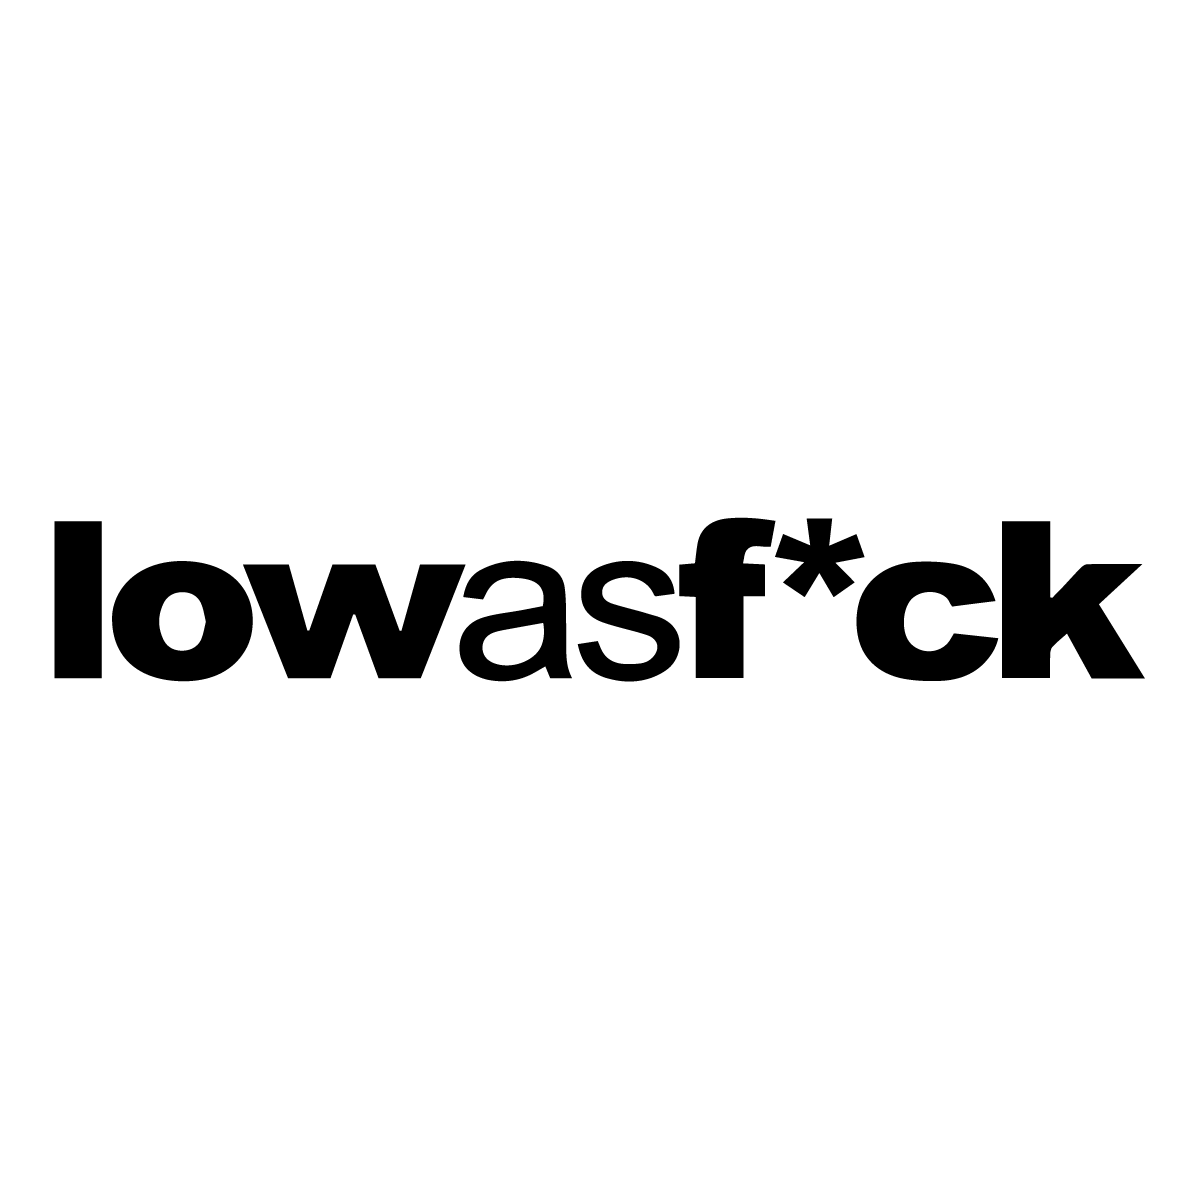 Low as fuck